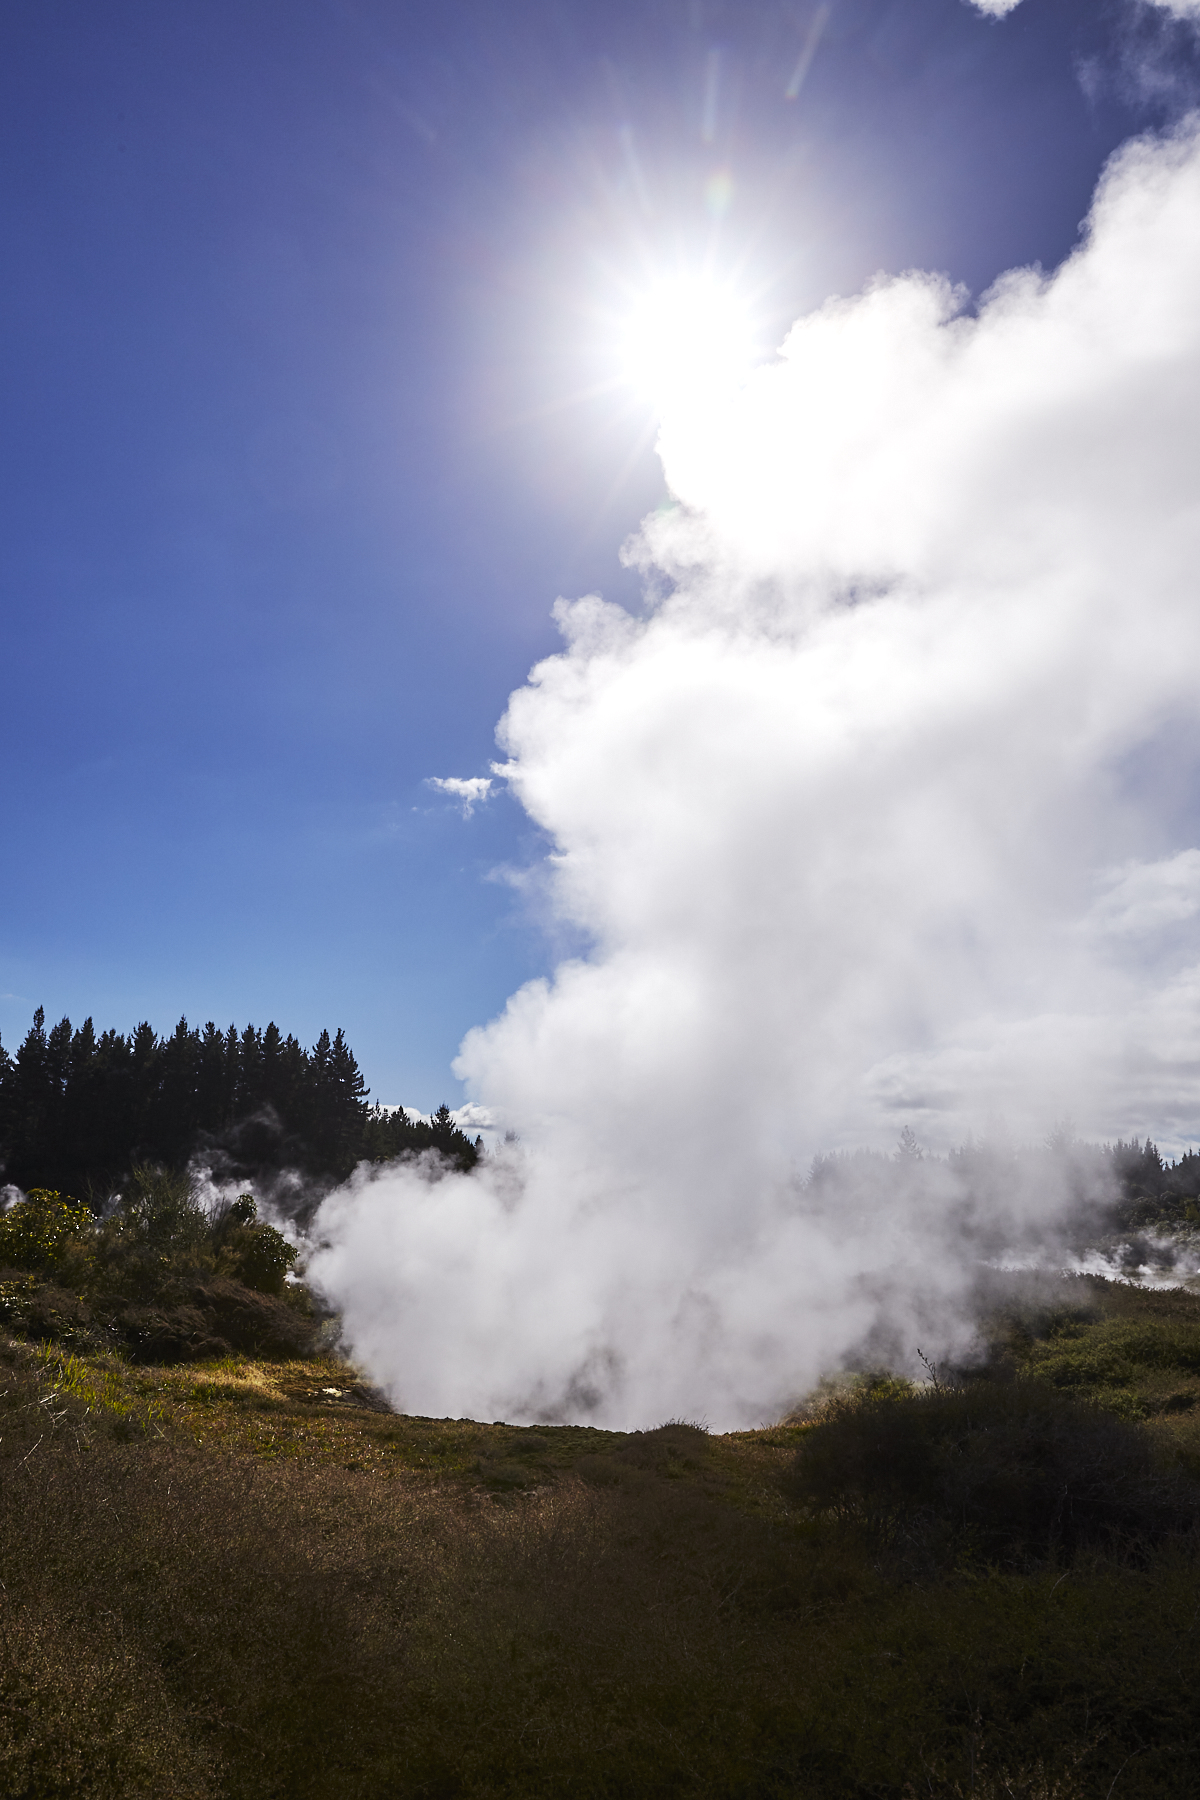 Craters of the moon landscape, Taupo, New Zealand